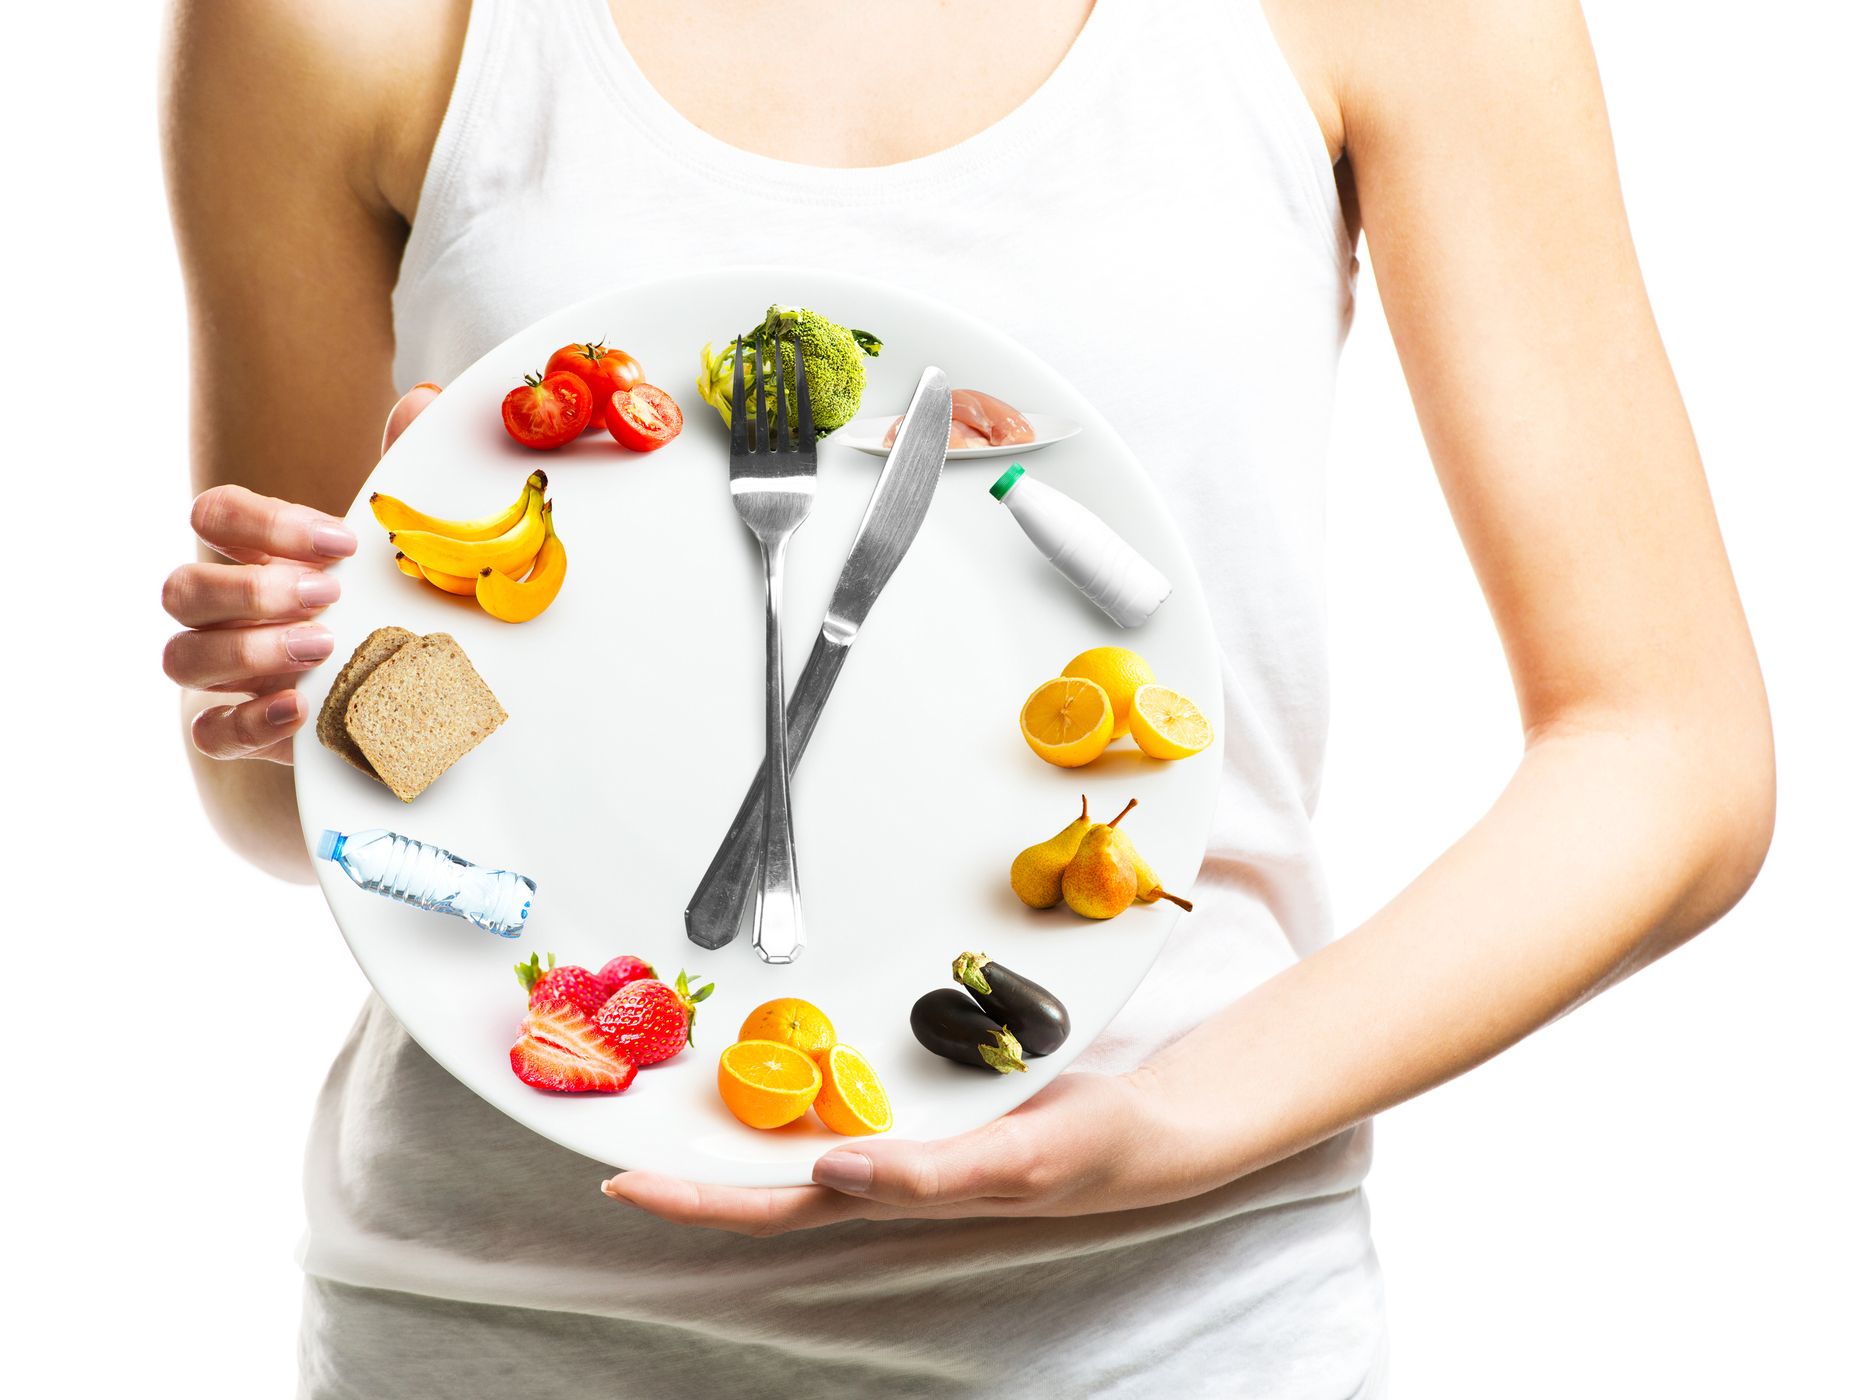 Take down blood pressure, blood sugar, LDL and weight just by timing your meals